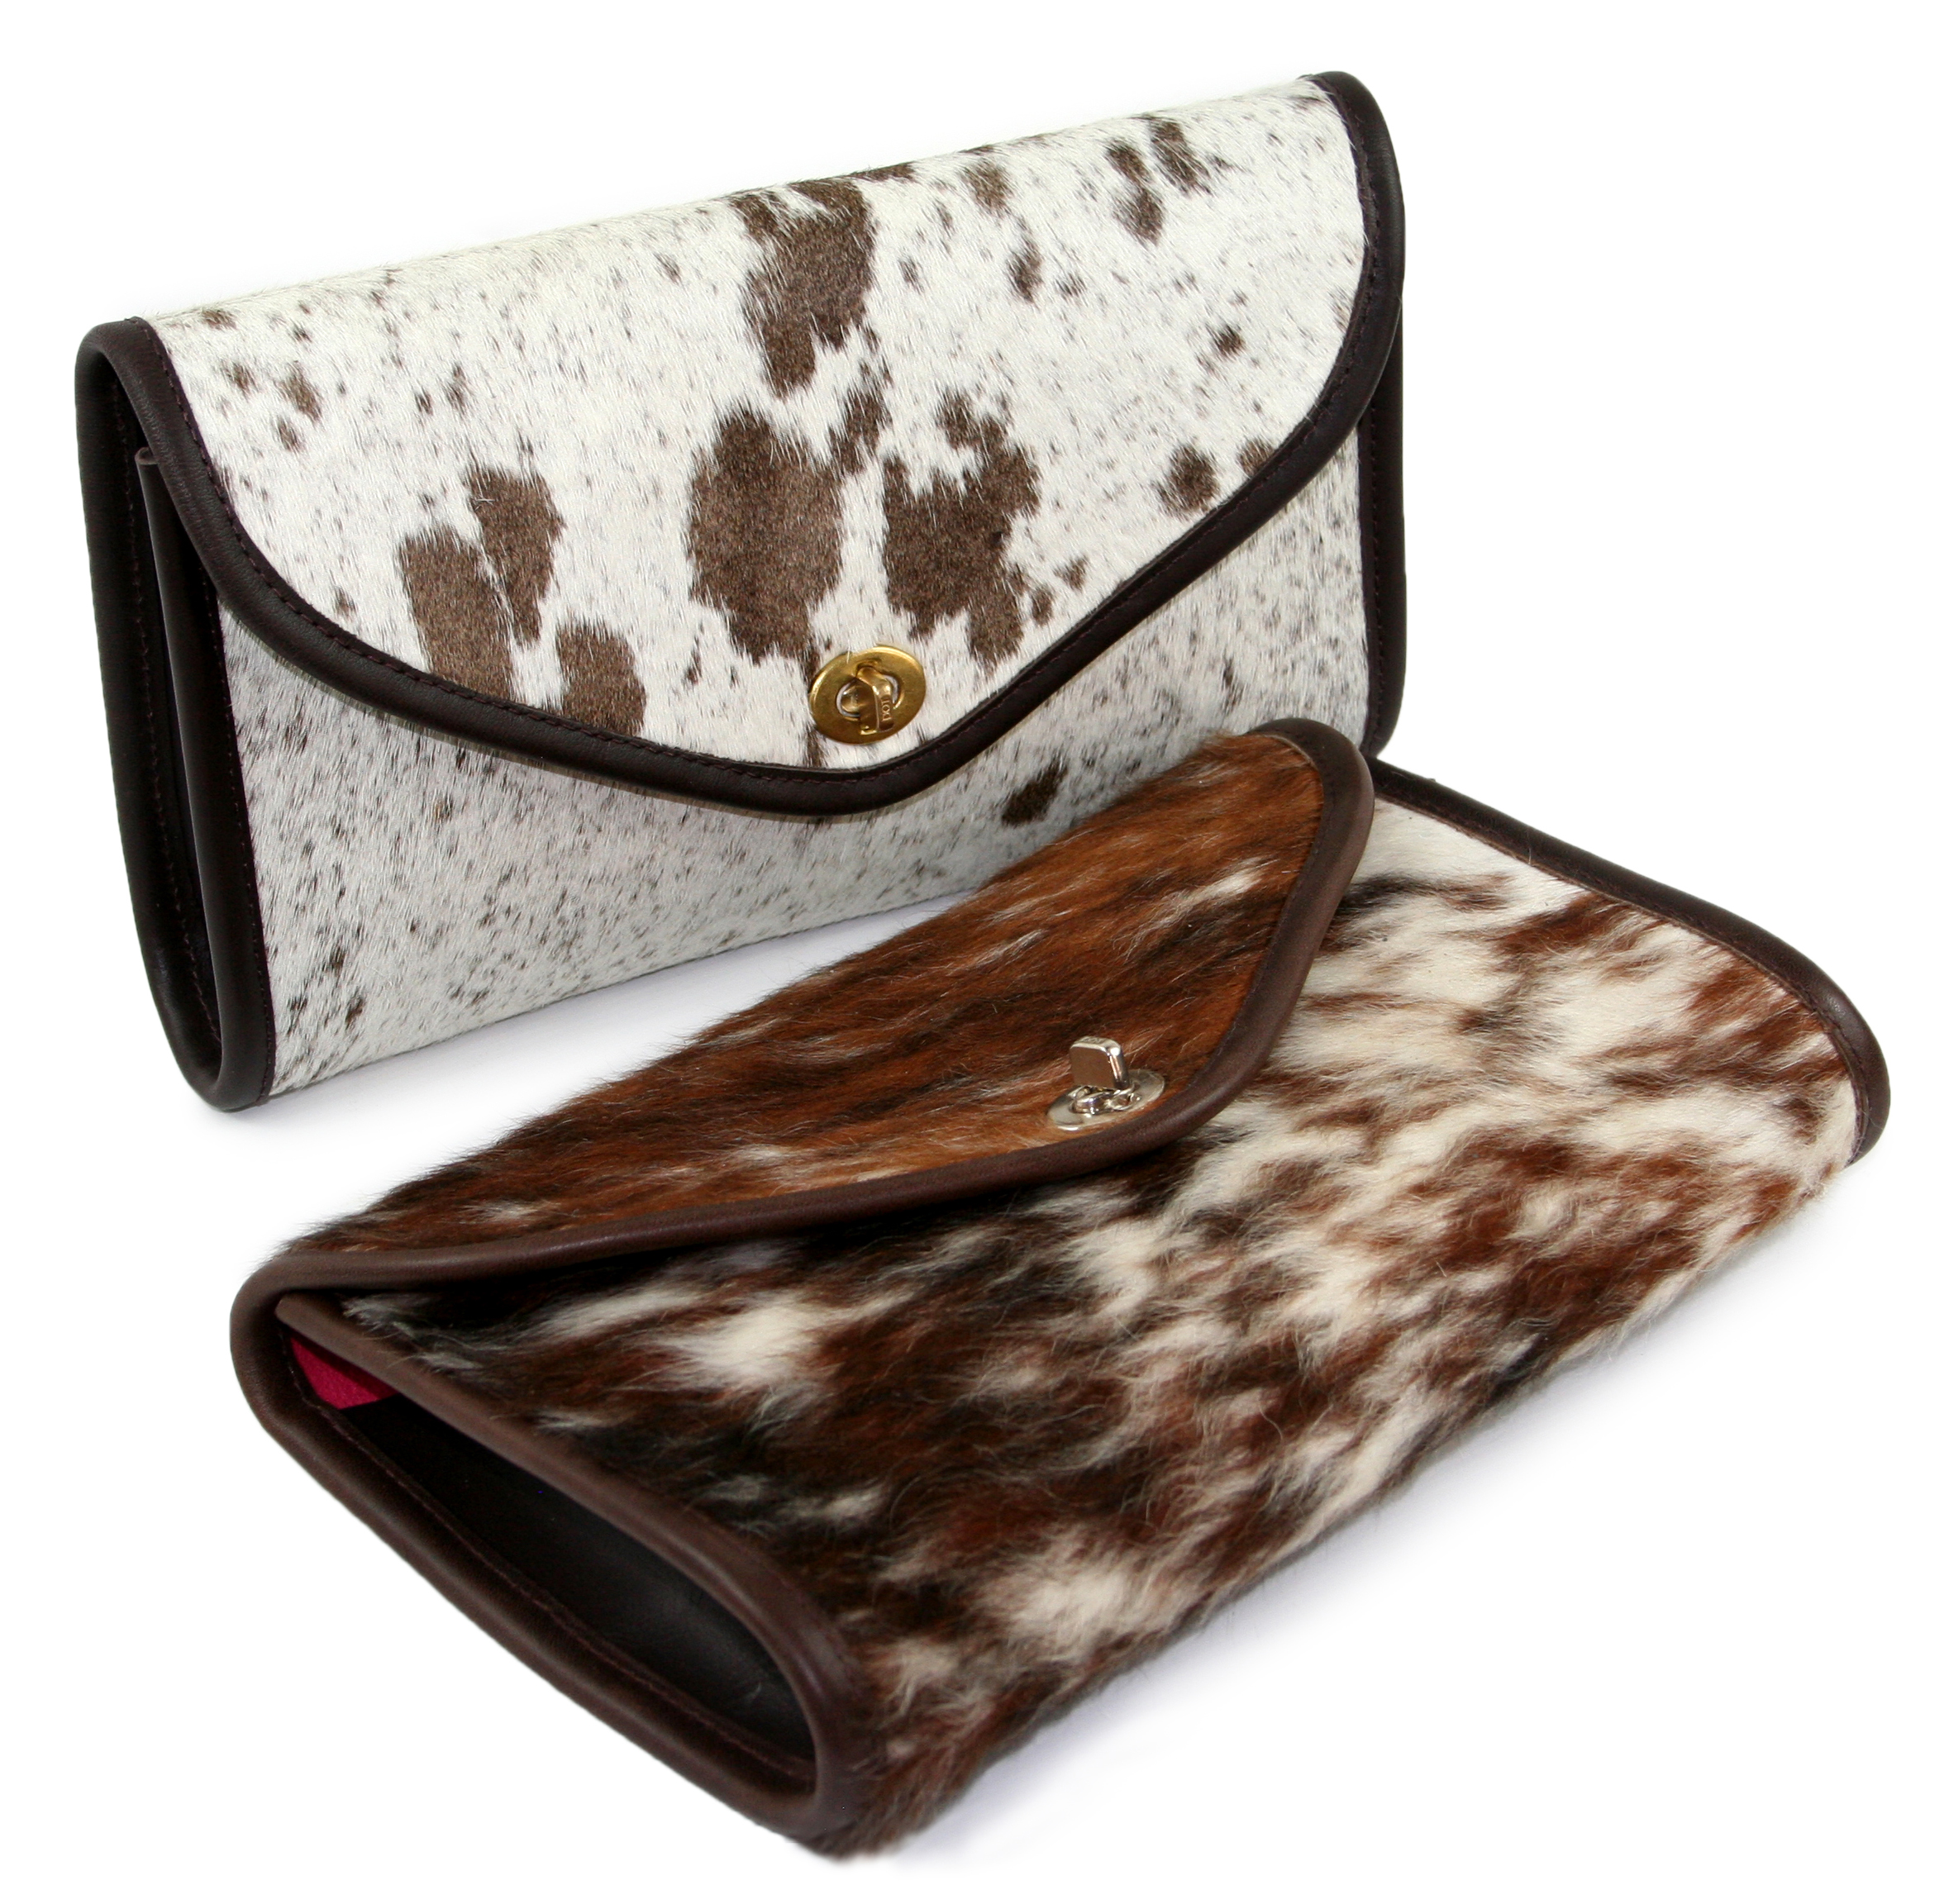 Flap Over Cow Hair Clutch with Turn Catch